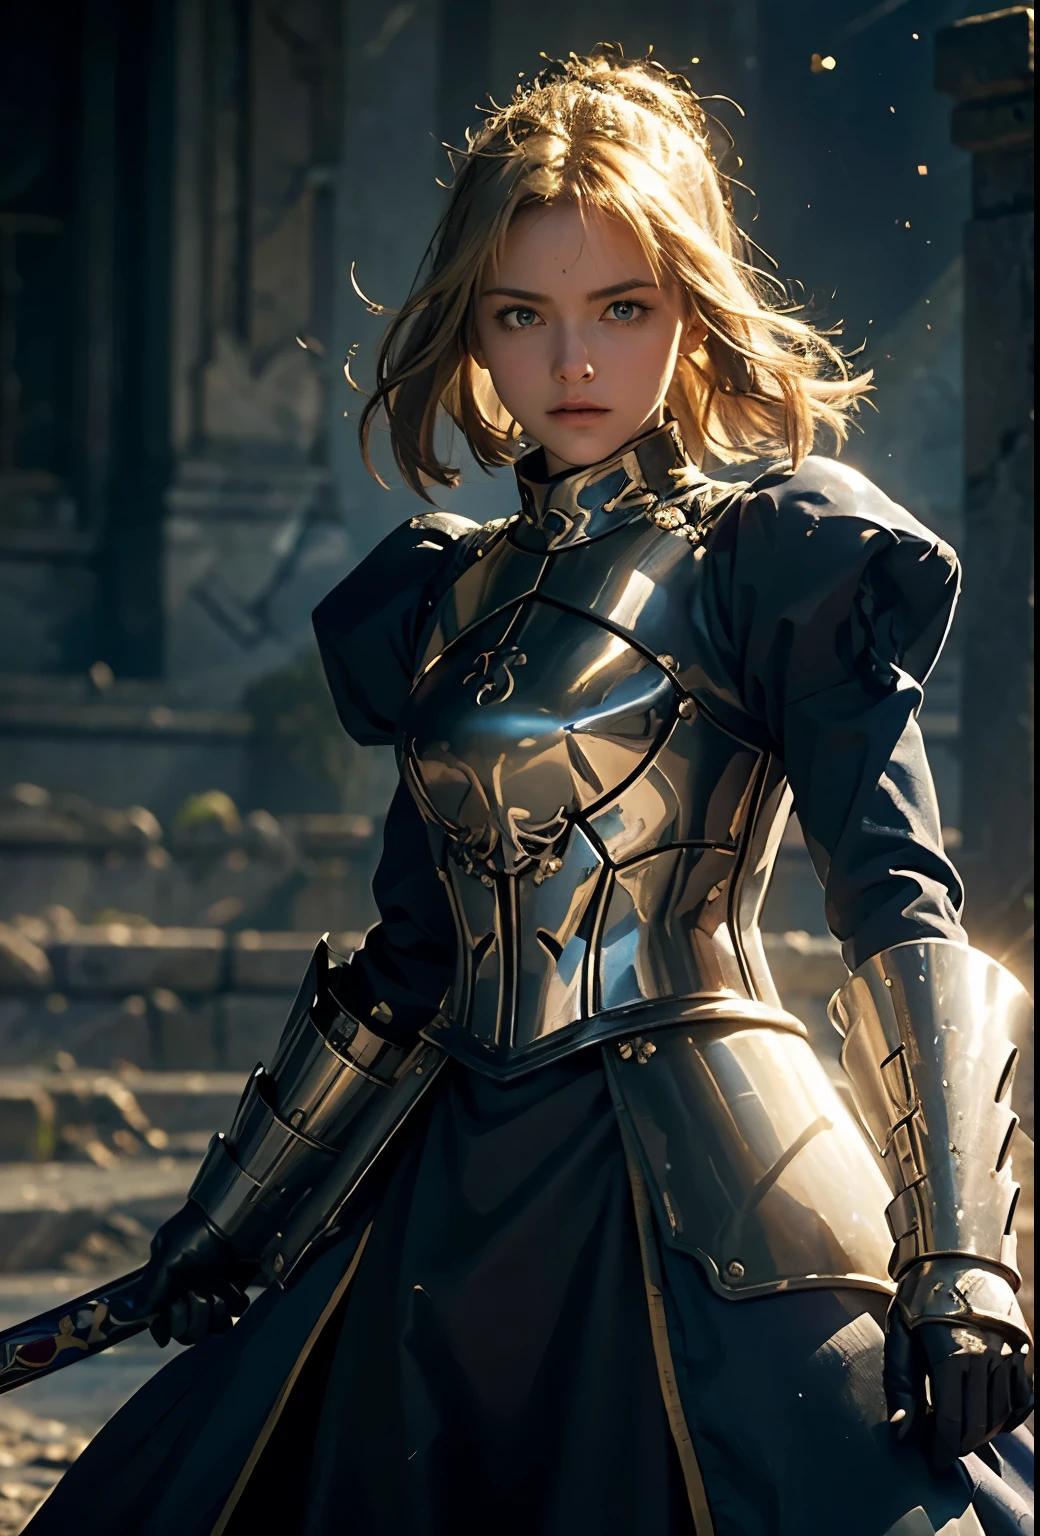 Create a hyper-realistic portrait of the renowned female knight known as Saber from the Fate series. She appears with her characteristic noble poise, her front-facing stance reveals her face—a visage that combines beauty with the fortitude of a seasoned warrior. Her hair is a golden halo cut in a classic bob, framing her fair face. Her striking green eyes, intense with focus and the wisdom of many battles, gaze directly at the viewer, drawing them into her story.

She dons her iconic armor, an exquisite fusion of medieval and modern aesthetics, with a gleaming silver breastplate detailed with blue and gold accents that signify her royal status and valor. The armor, while sturdy and combat-ready, is sculpted to her form, showcasing a balance of strength and femininity.

In one hand, she confidently holds the legendary sword Excalibur, its blade glowing with a bright, otherworldly light, illuminating her features and casting a gentle radiance on her armor. The background is a subtle suggestion of a historic battlefield, but her commanding presence is the heart of the image, symbolizing her role as a protector and hero across time.”